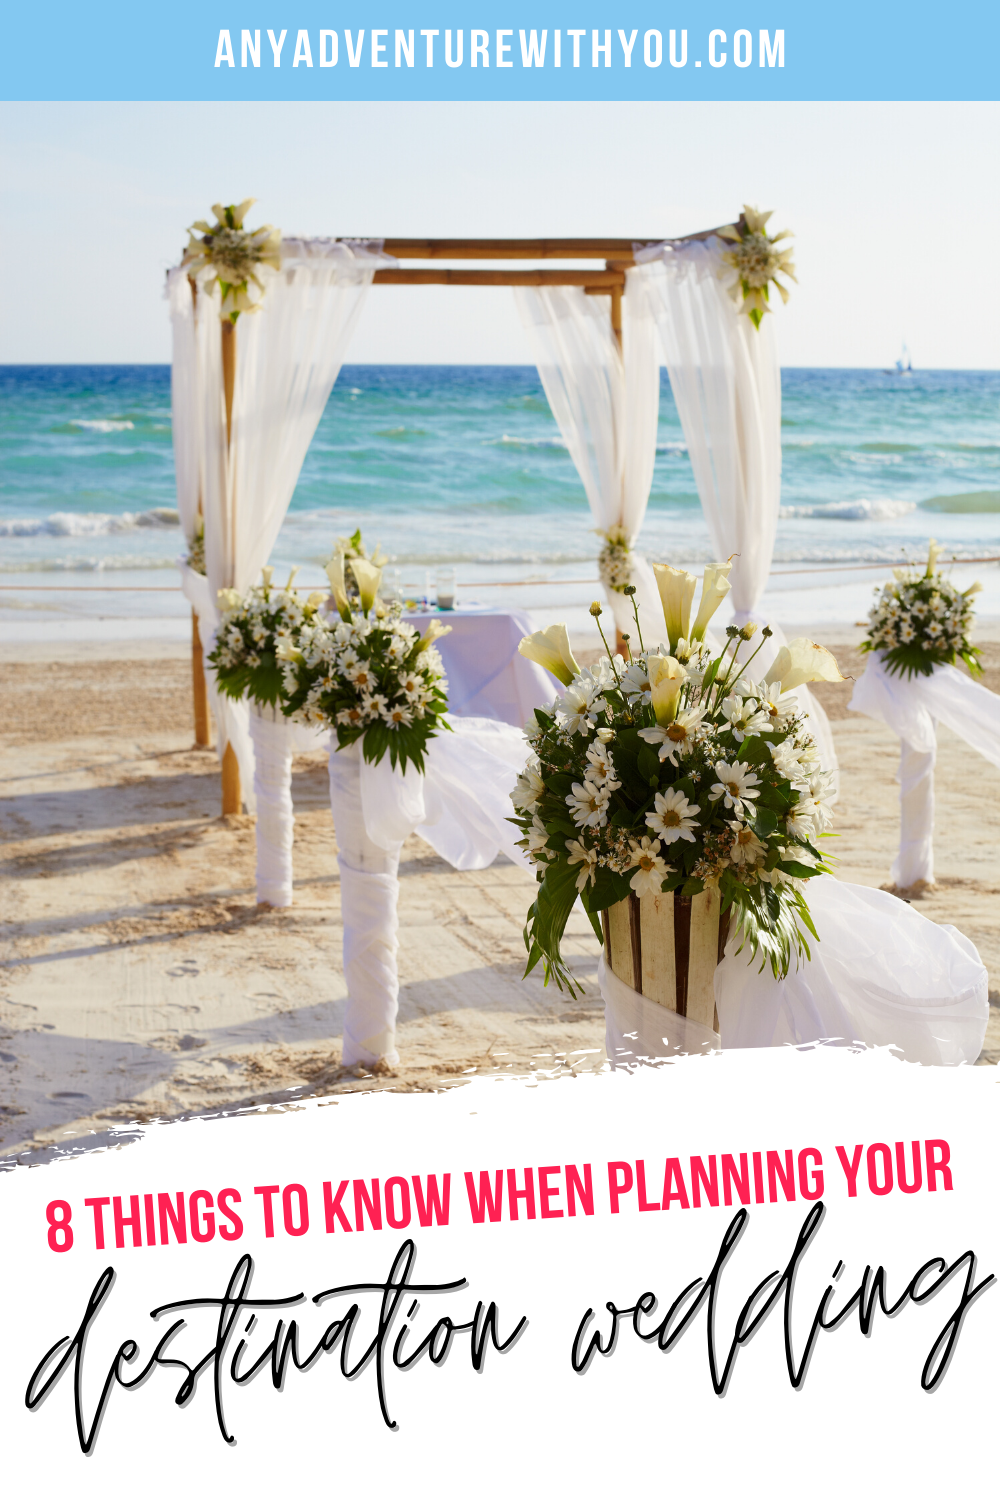 Whether you plan to get married on a beach or on a cruise, at a resort or on top of a mountain (or anywhere in between!), make sure to follow these eight tips to make your destination wedding the best day ever. #DestinationWedding #CruiseWedding #Wedding #WeddingPlanning #DestinationTravel